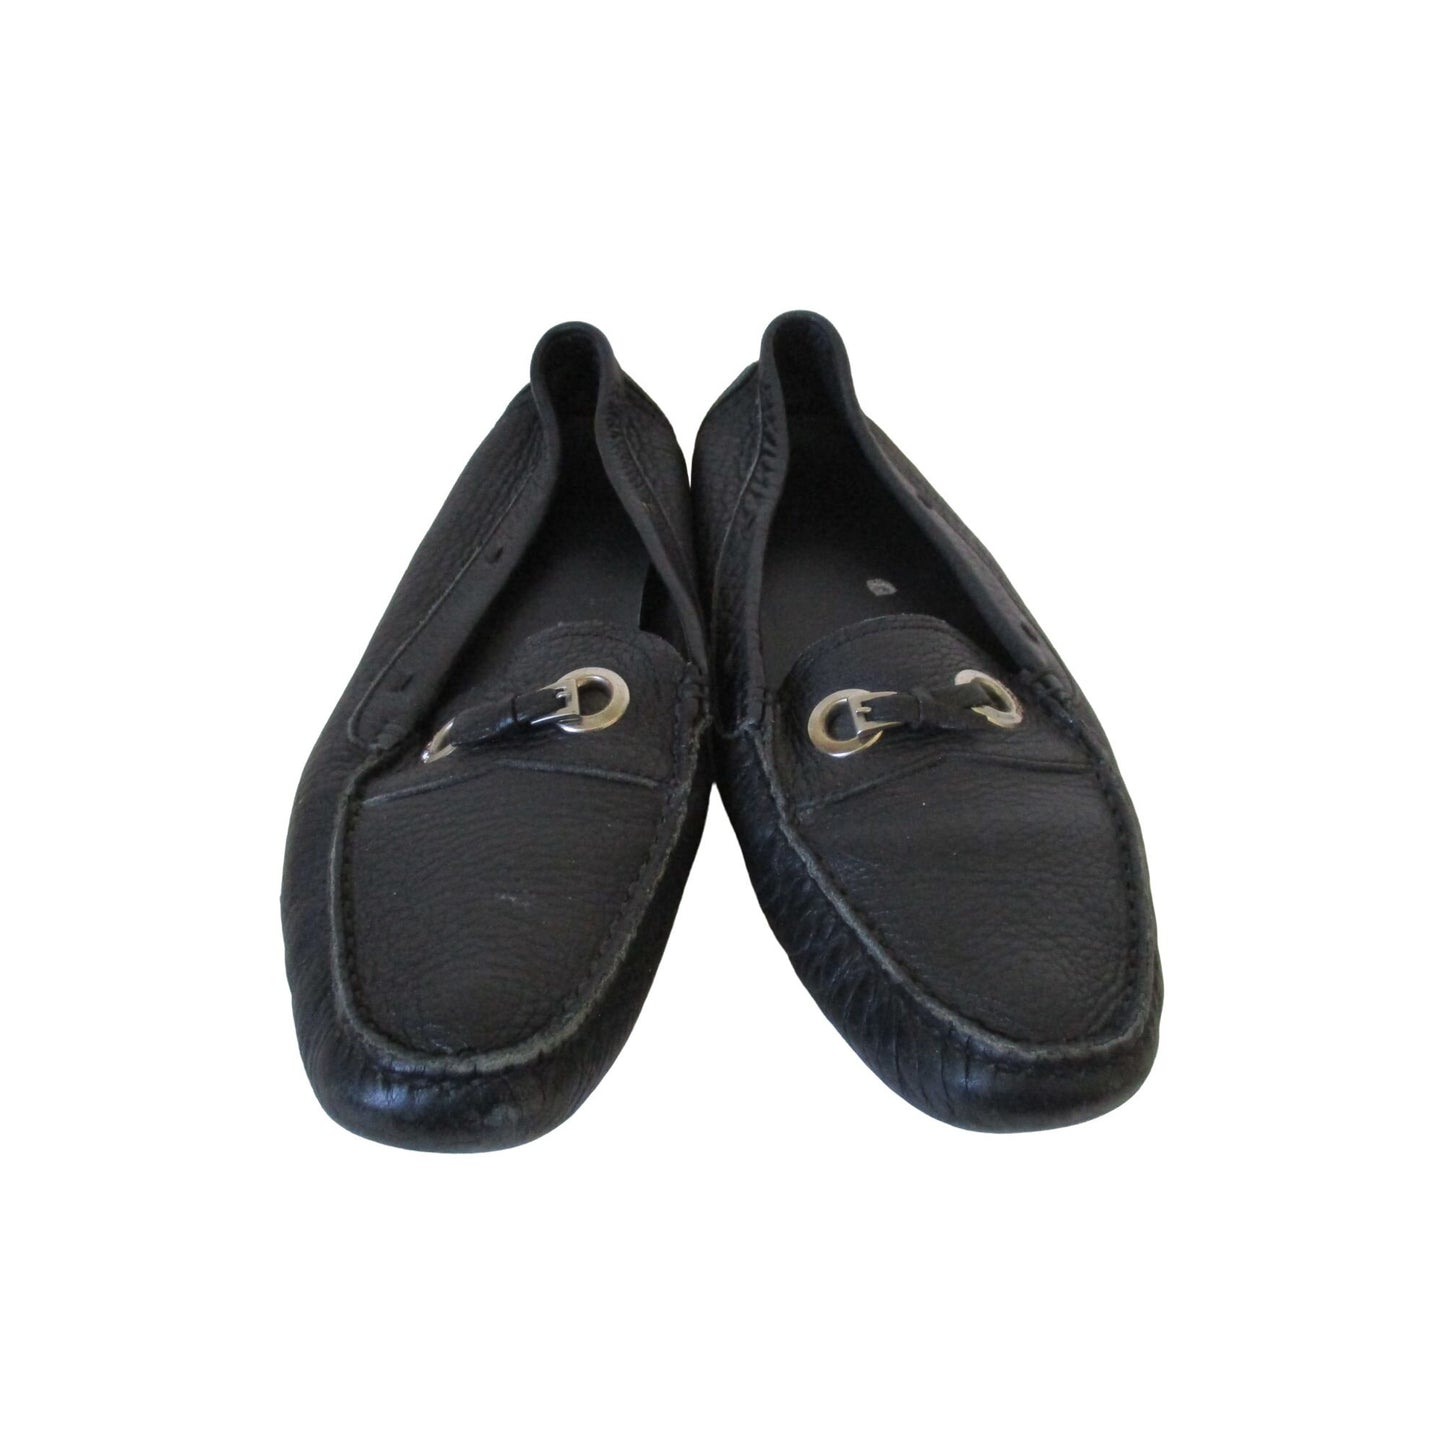 Prada black leather size 37 car shoe style loafers with chrome hardware